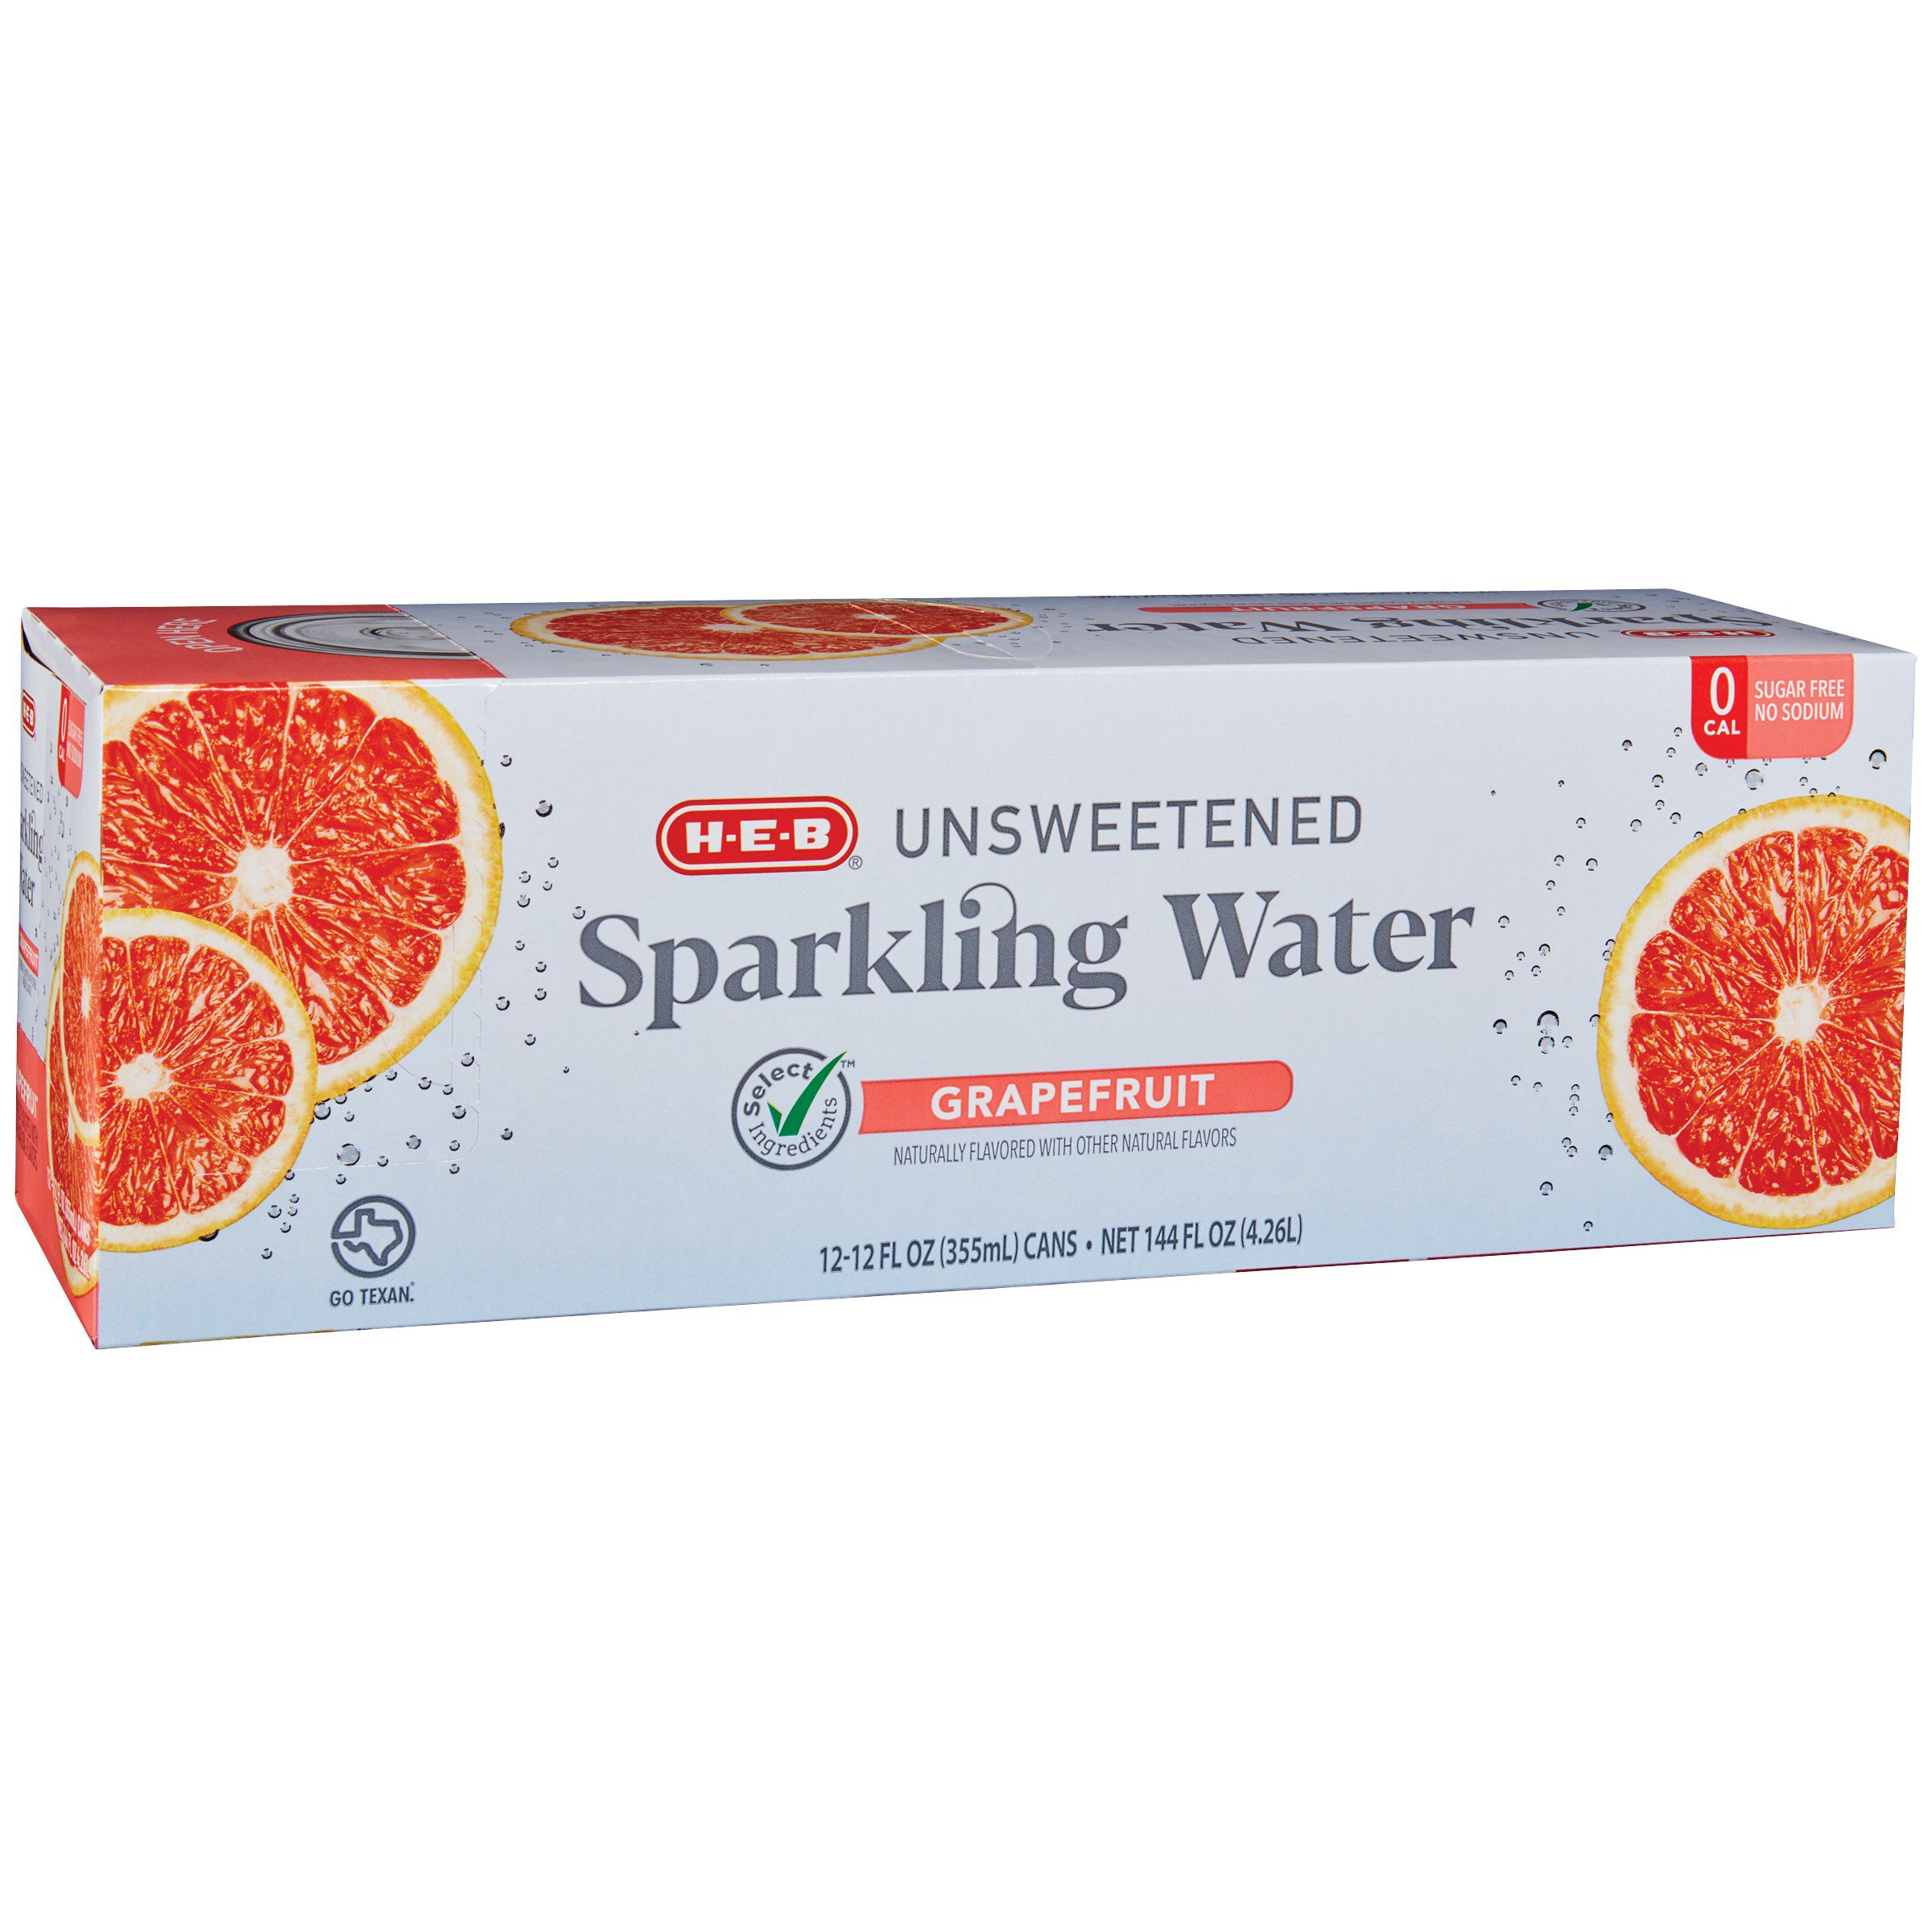 H-E-B Select Ingredients Unsweetened Grapefruit Sparkling Water ...